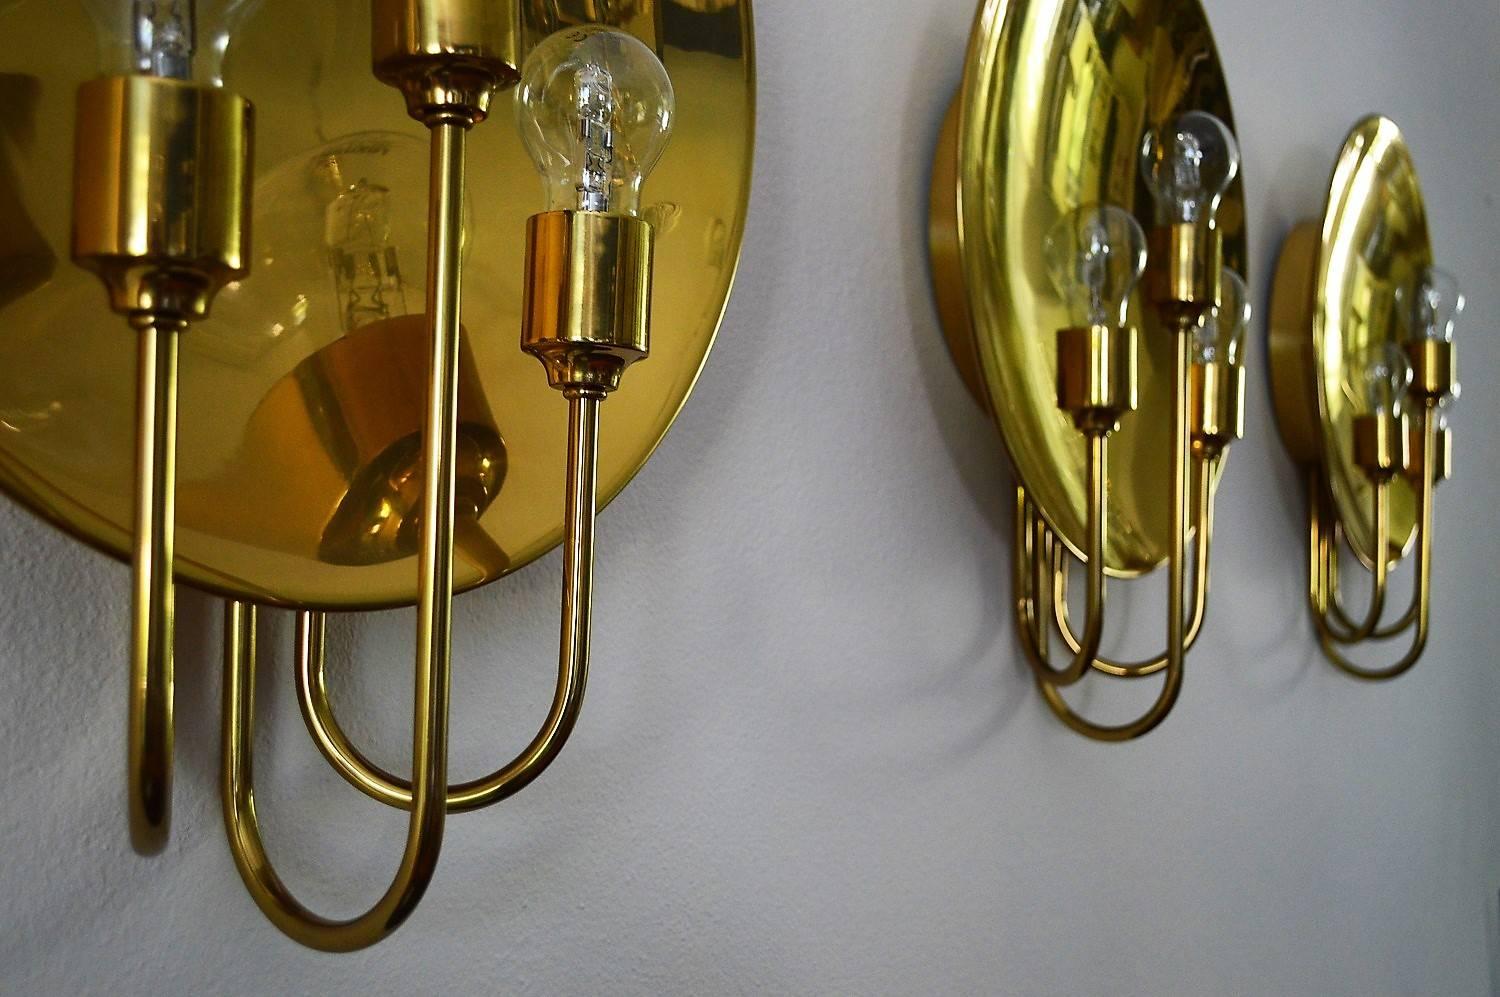 Polished German Midcentury Brass Wall Lights or Sconces by Florian Schulz, 1970s